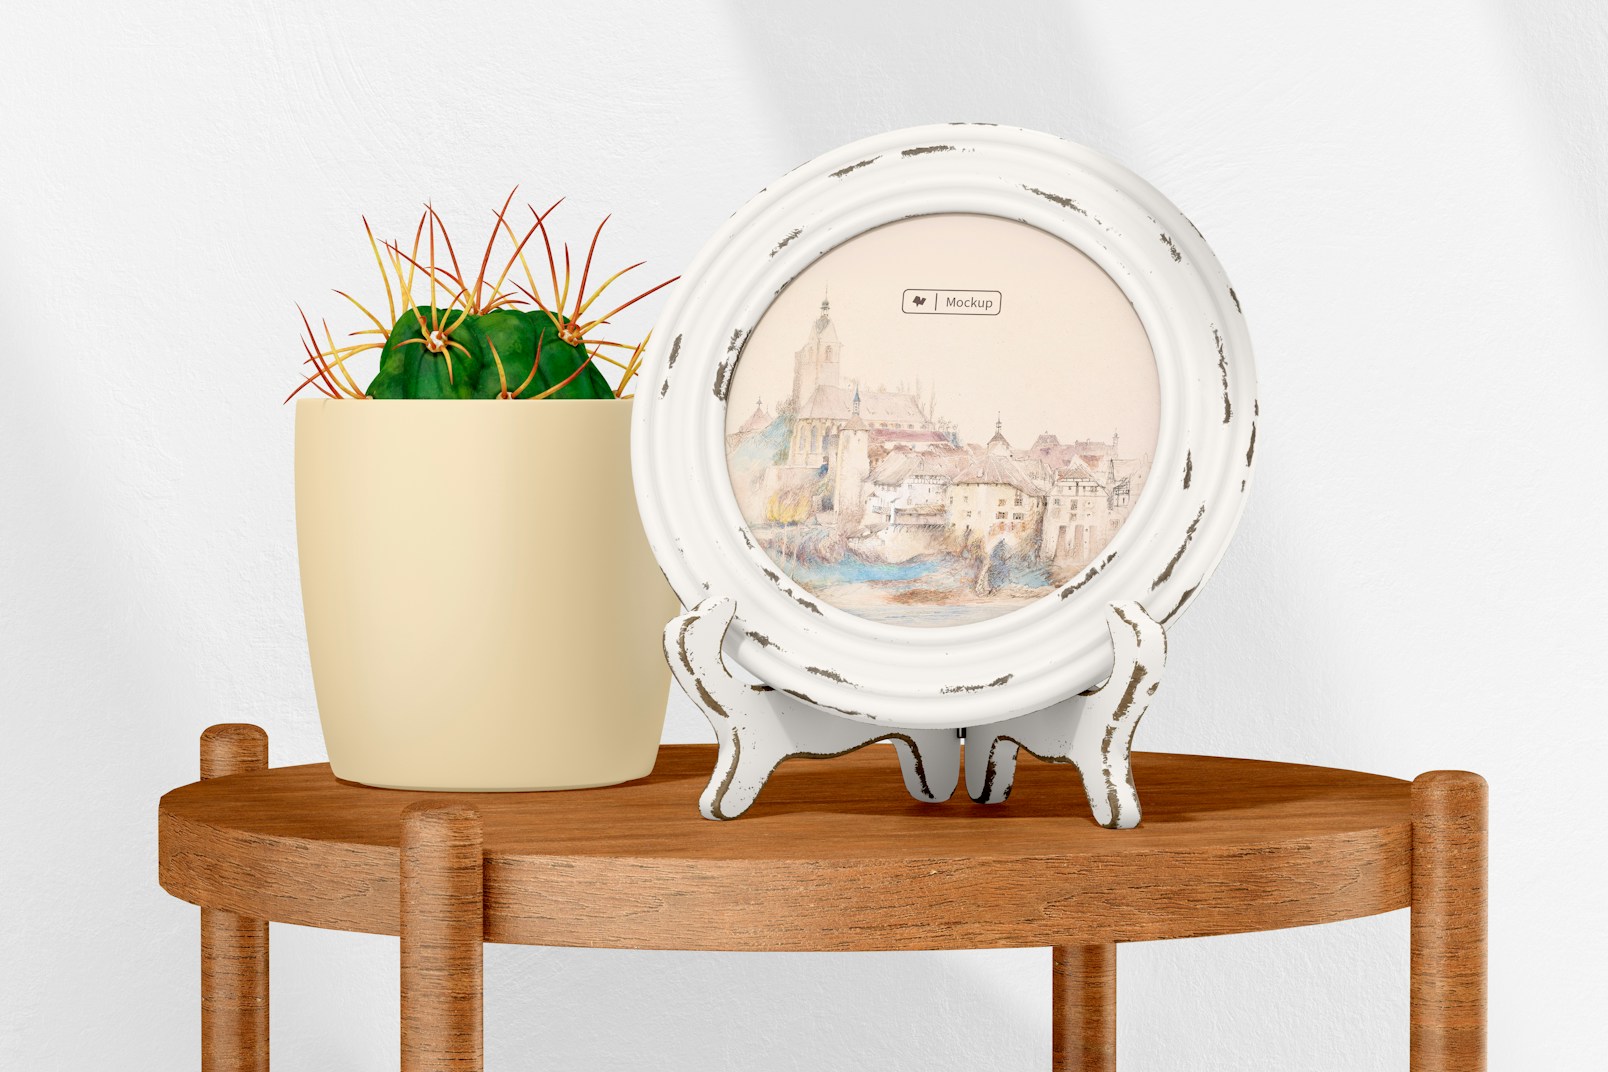 Distressed Photo Frame Mockup, with Plant Pot